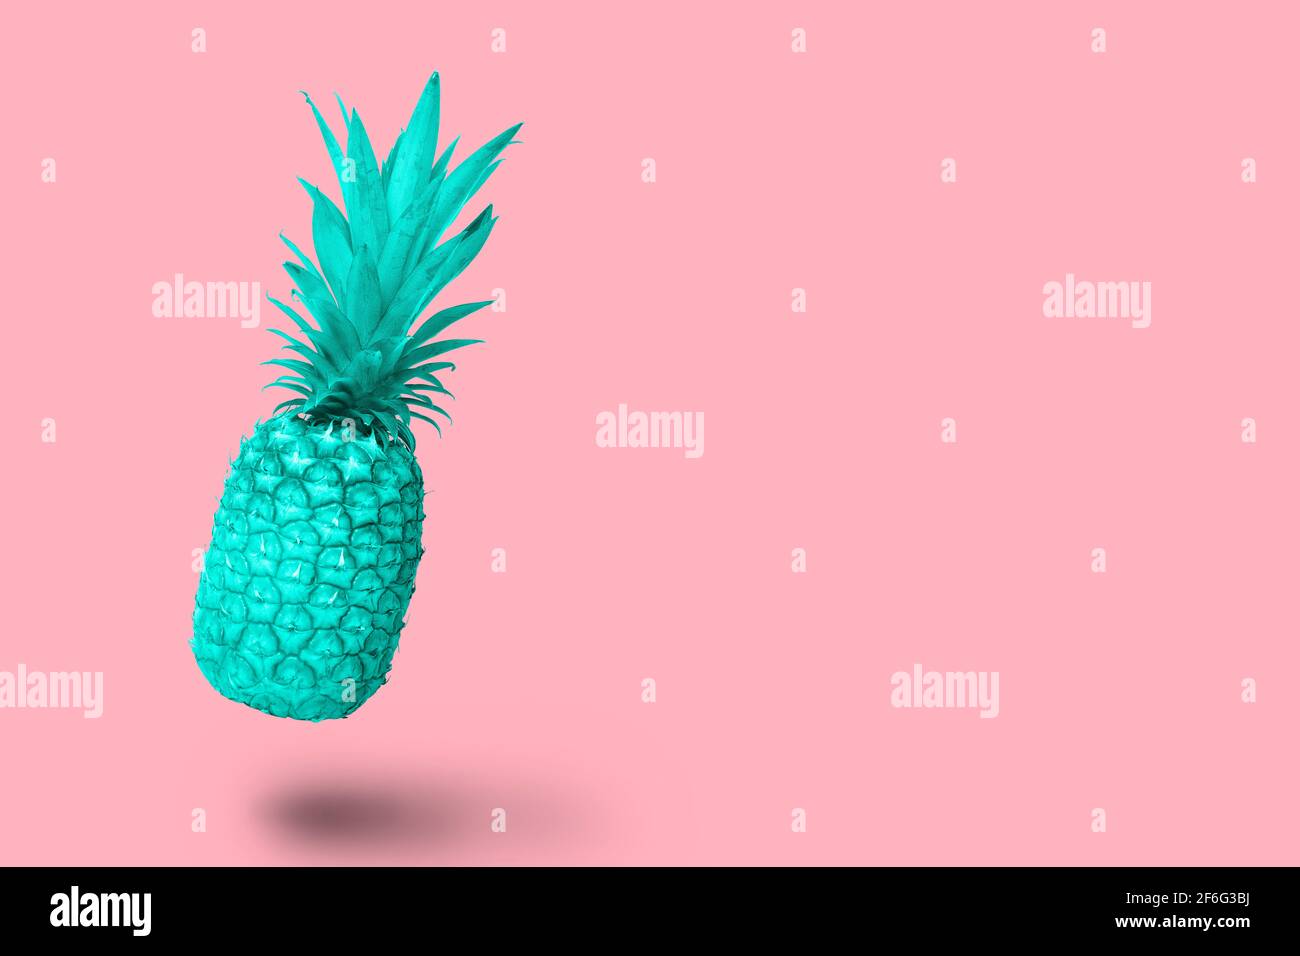 Design turquoise blue pineapple fruit floating on a pink background Stock Photo